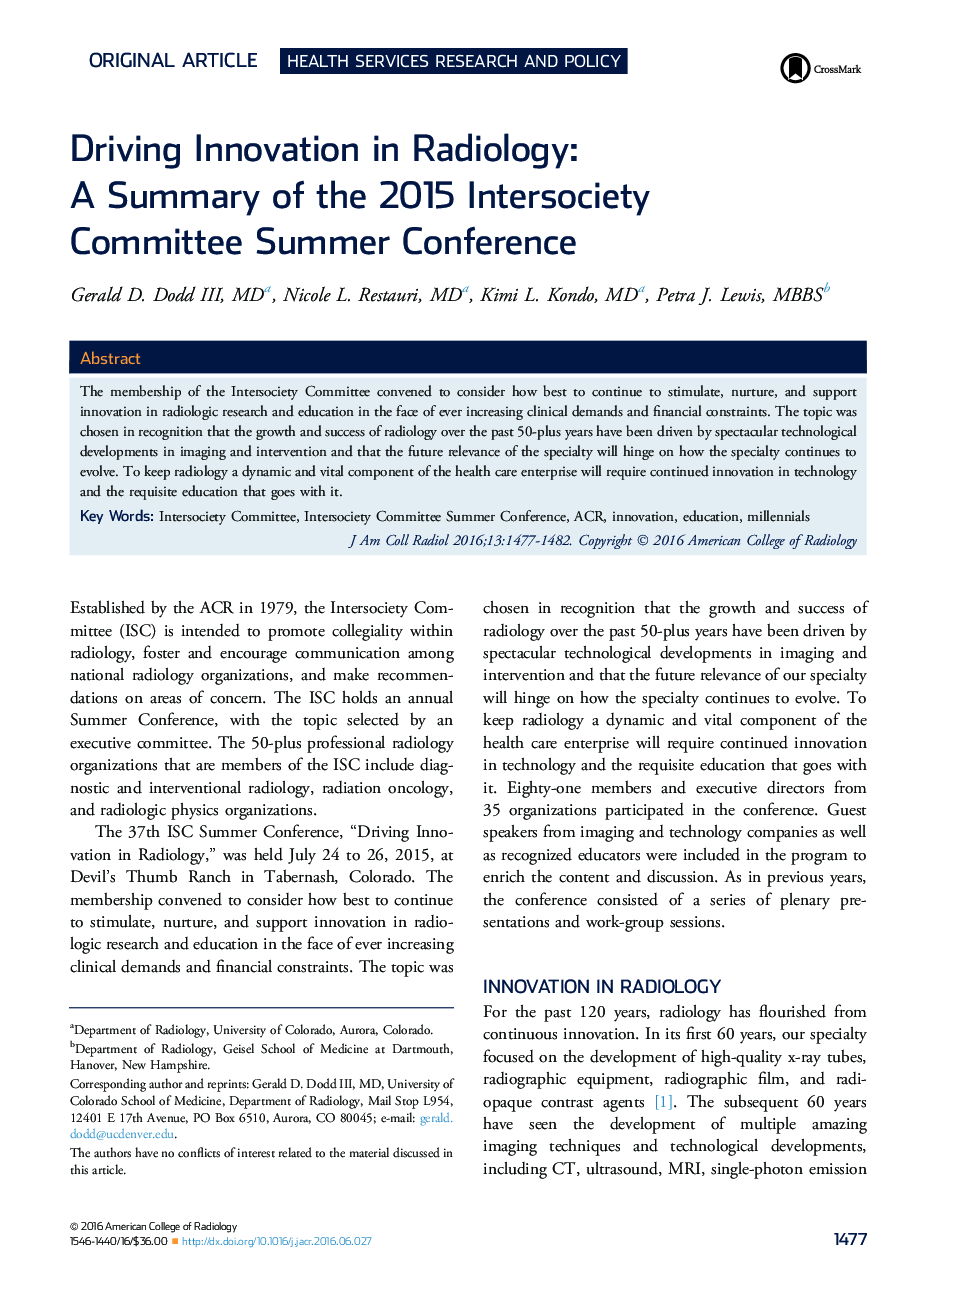 Original articleHealth services research and policyDriving Innovation in Radiology: AÂ Summary of the 2015 Intersociety Committee Summer Conference